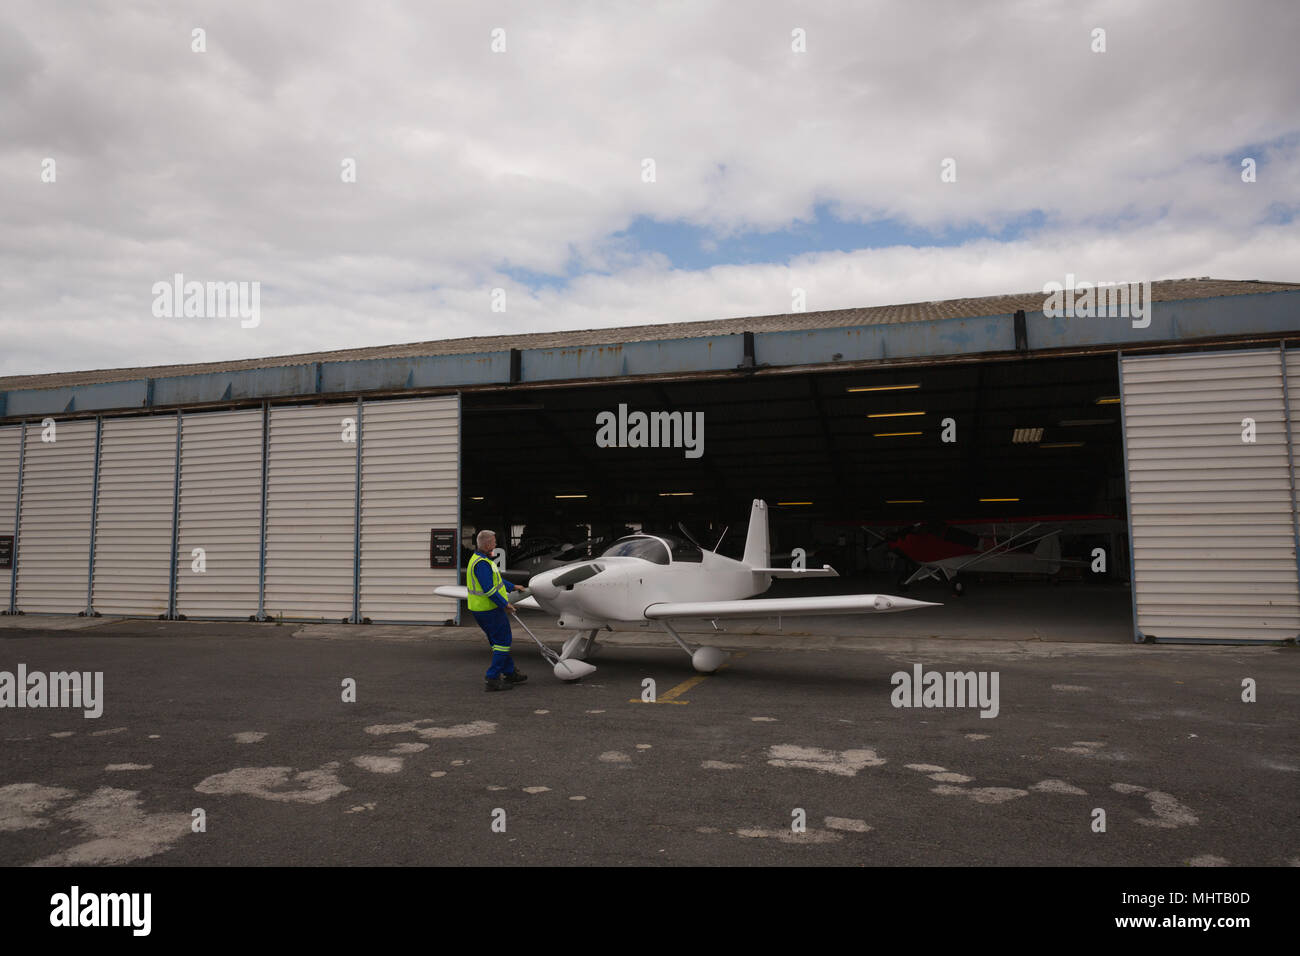 Crew member taking out aircraft from hangar Stock Photo